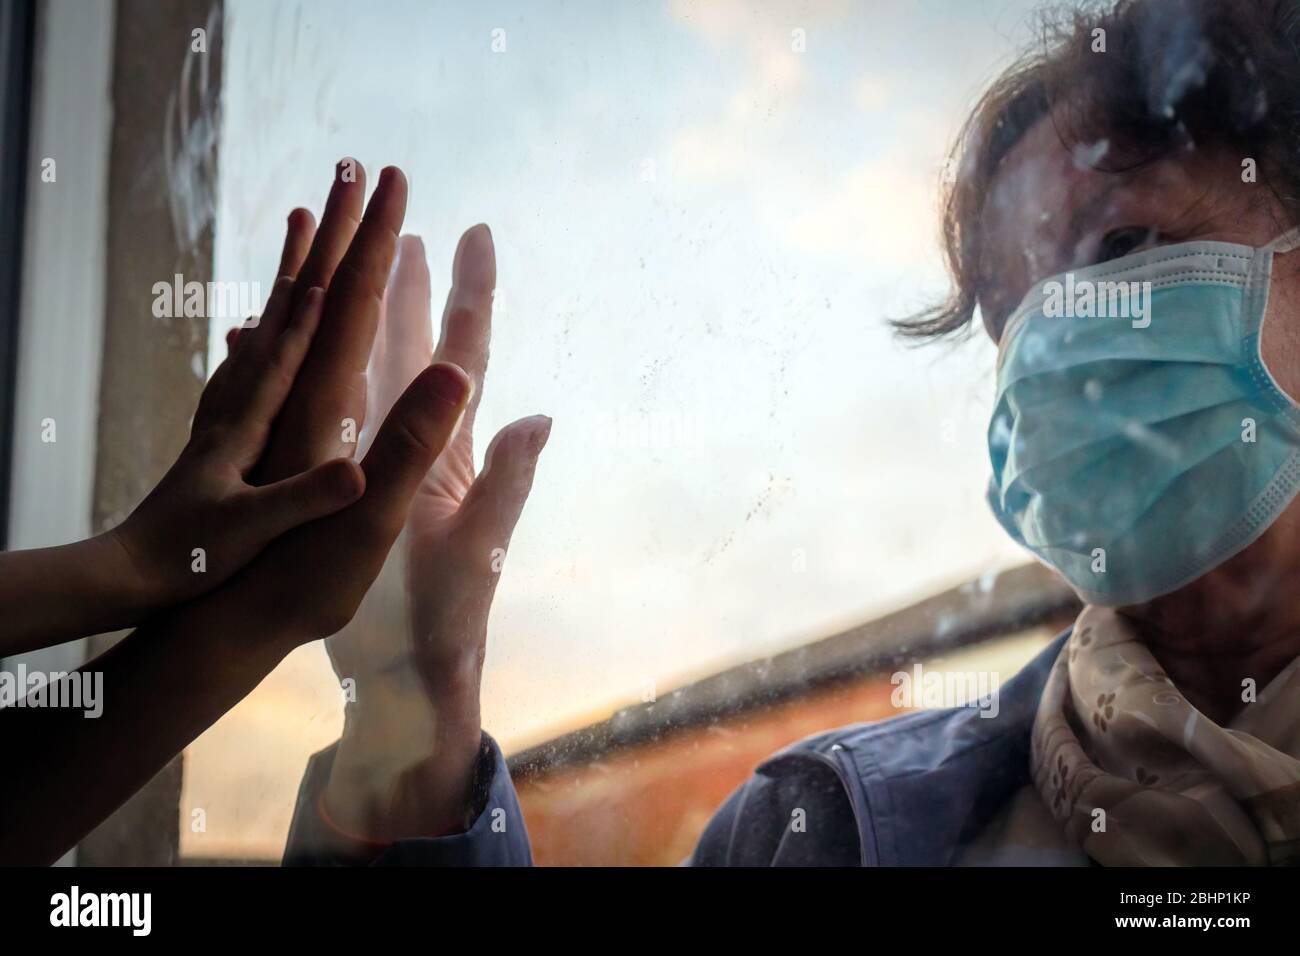 social distancing among the family, hand of the woman and her grandchildren on window plane, concept coronavirus and covid-19 pandemic Stock Photo